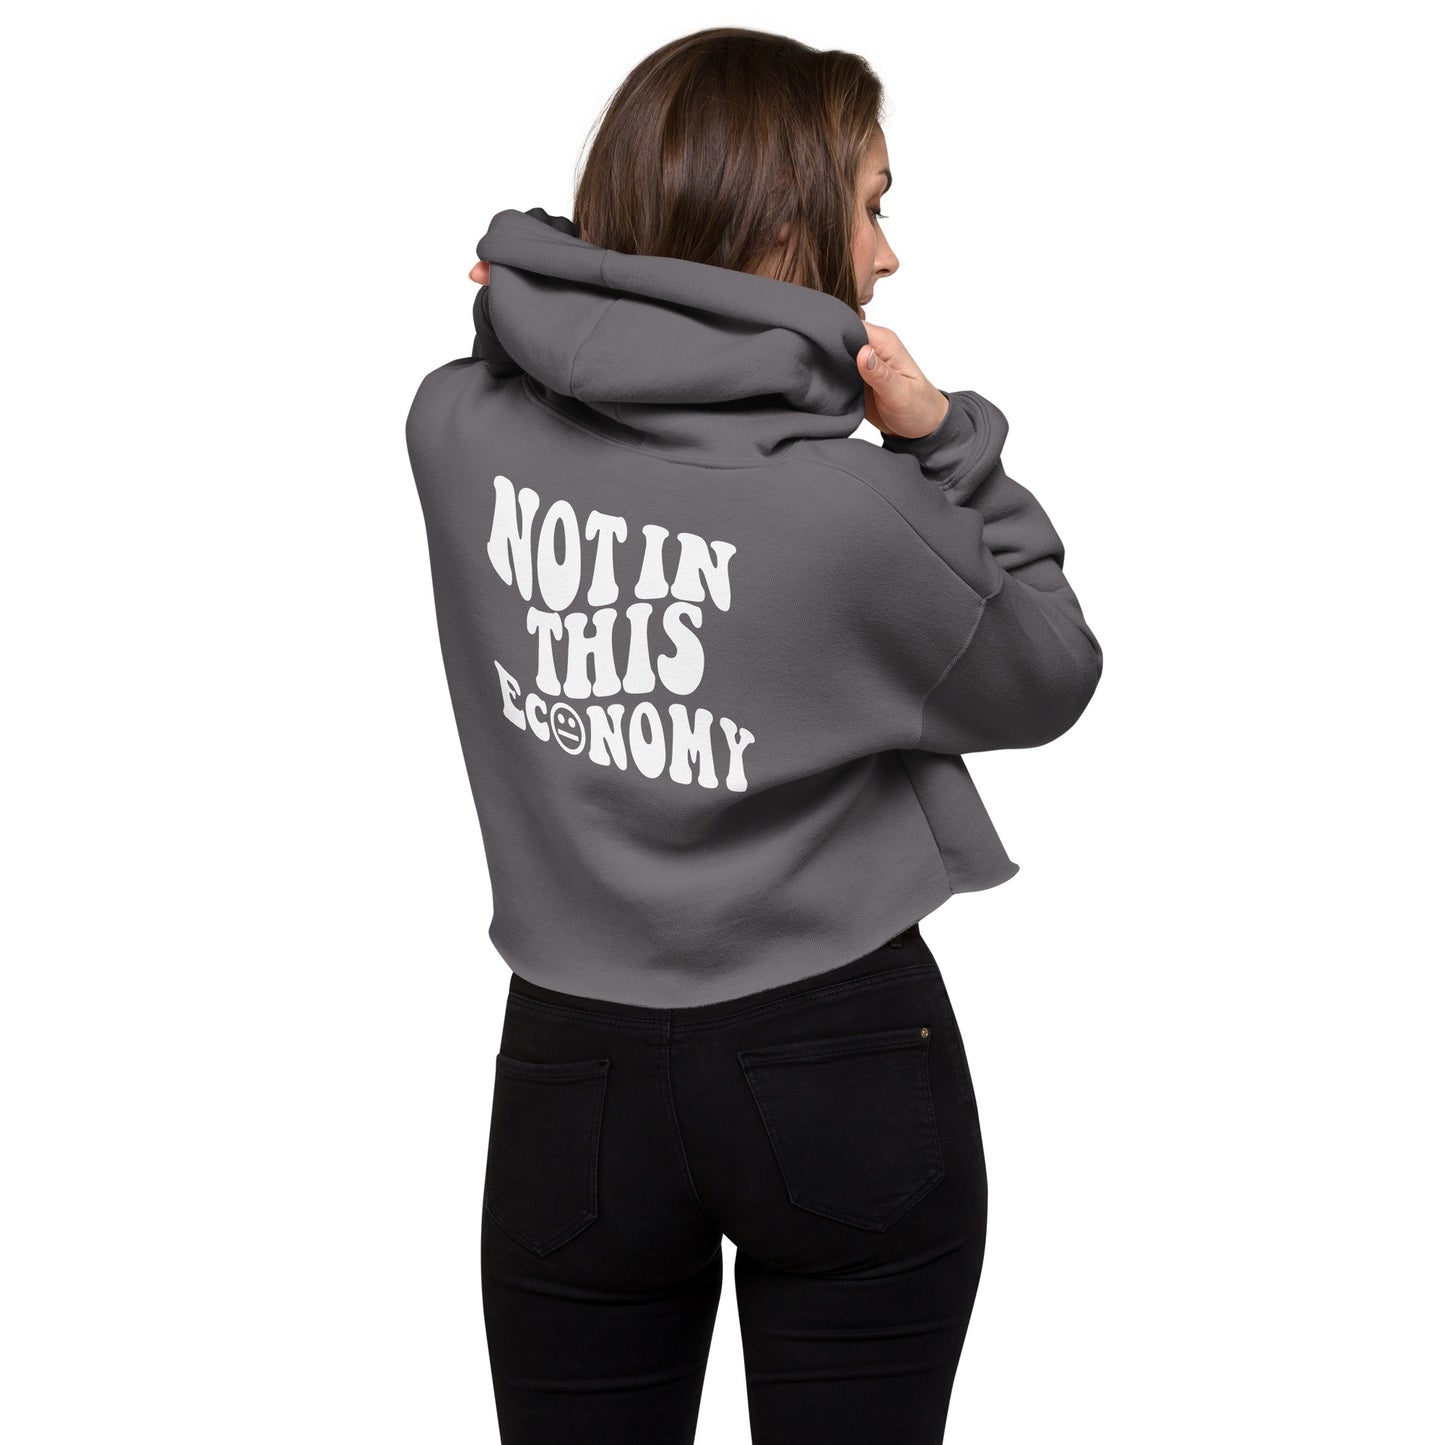 RedHanded Not In This Economy Cropped Hoodie